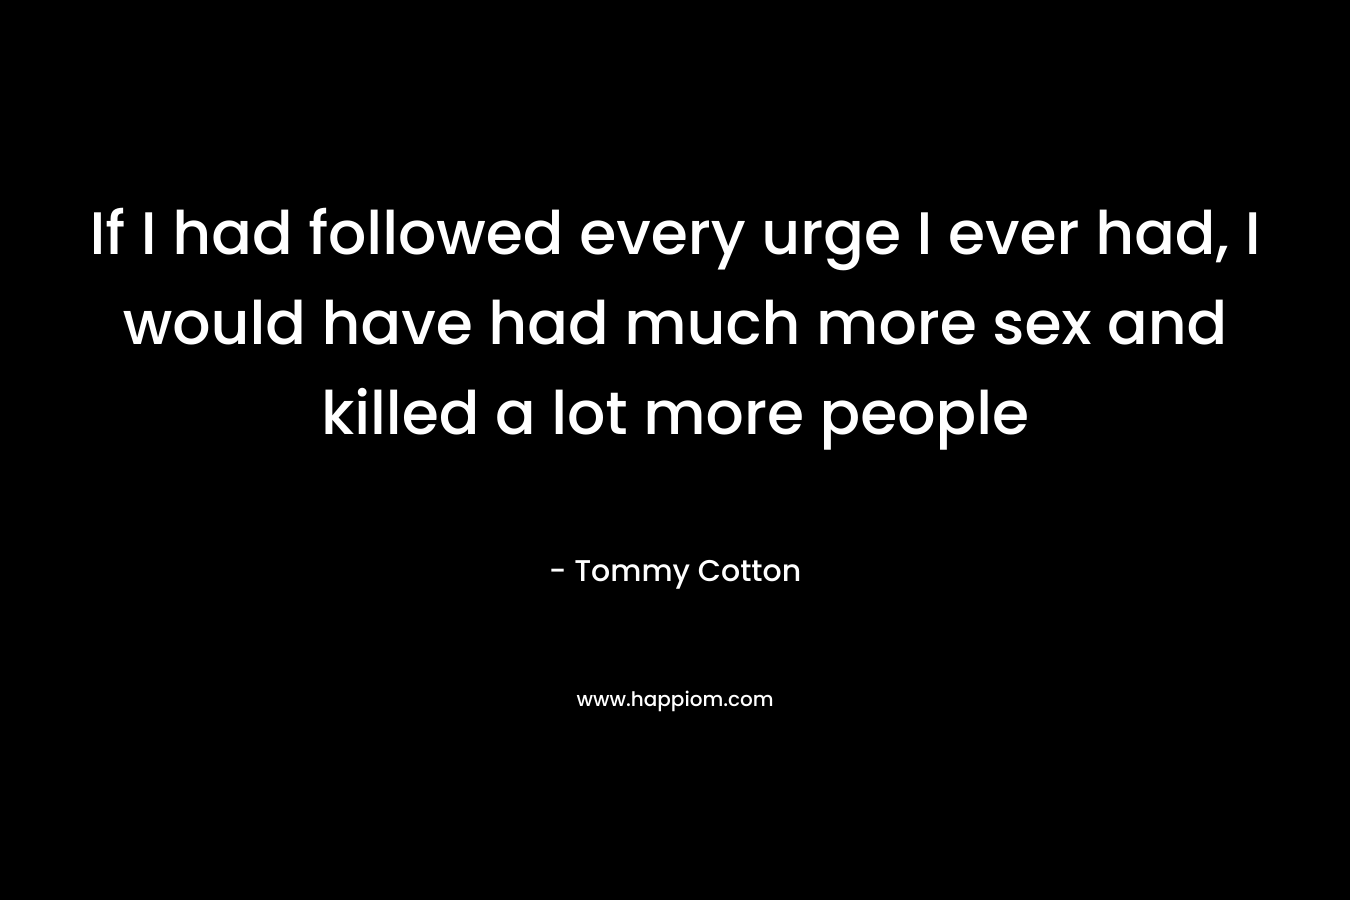 If I had followed every urge I ever had, I would have had much more sex and killed a lot more people